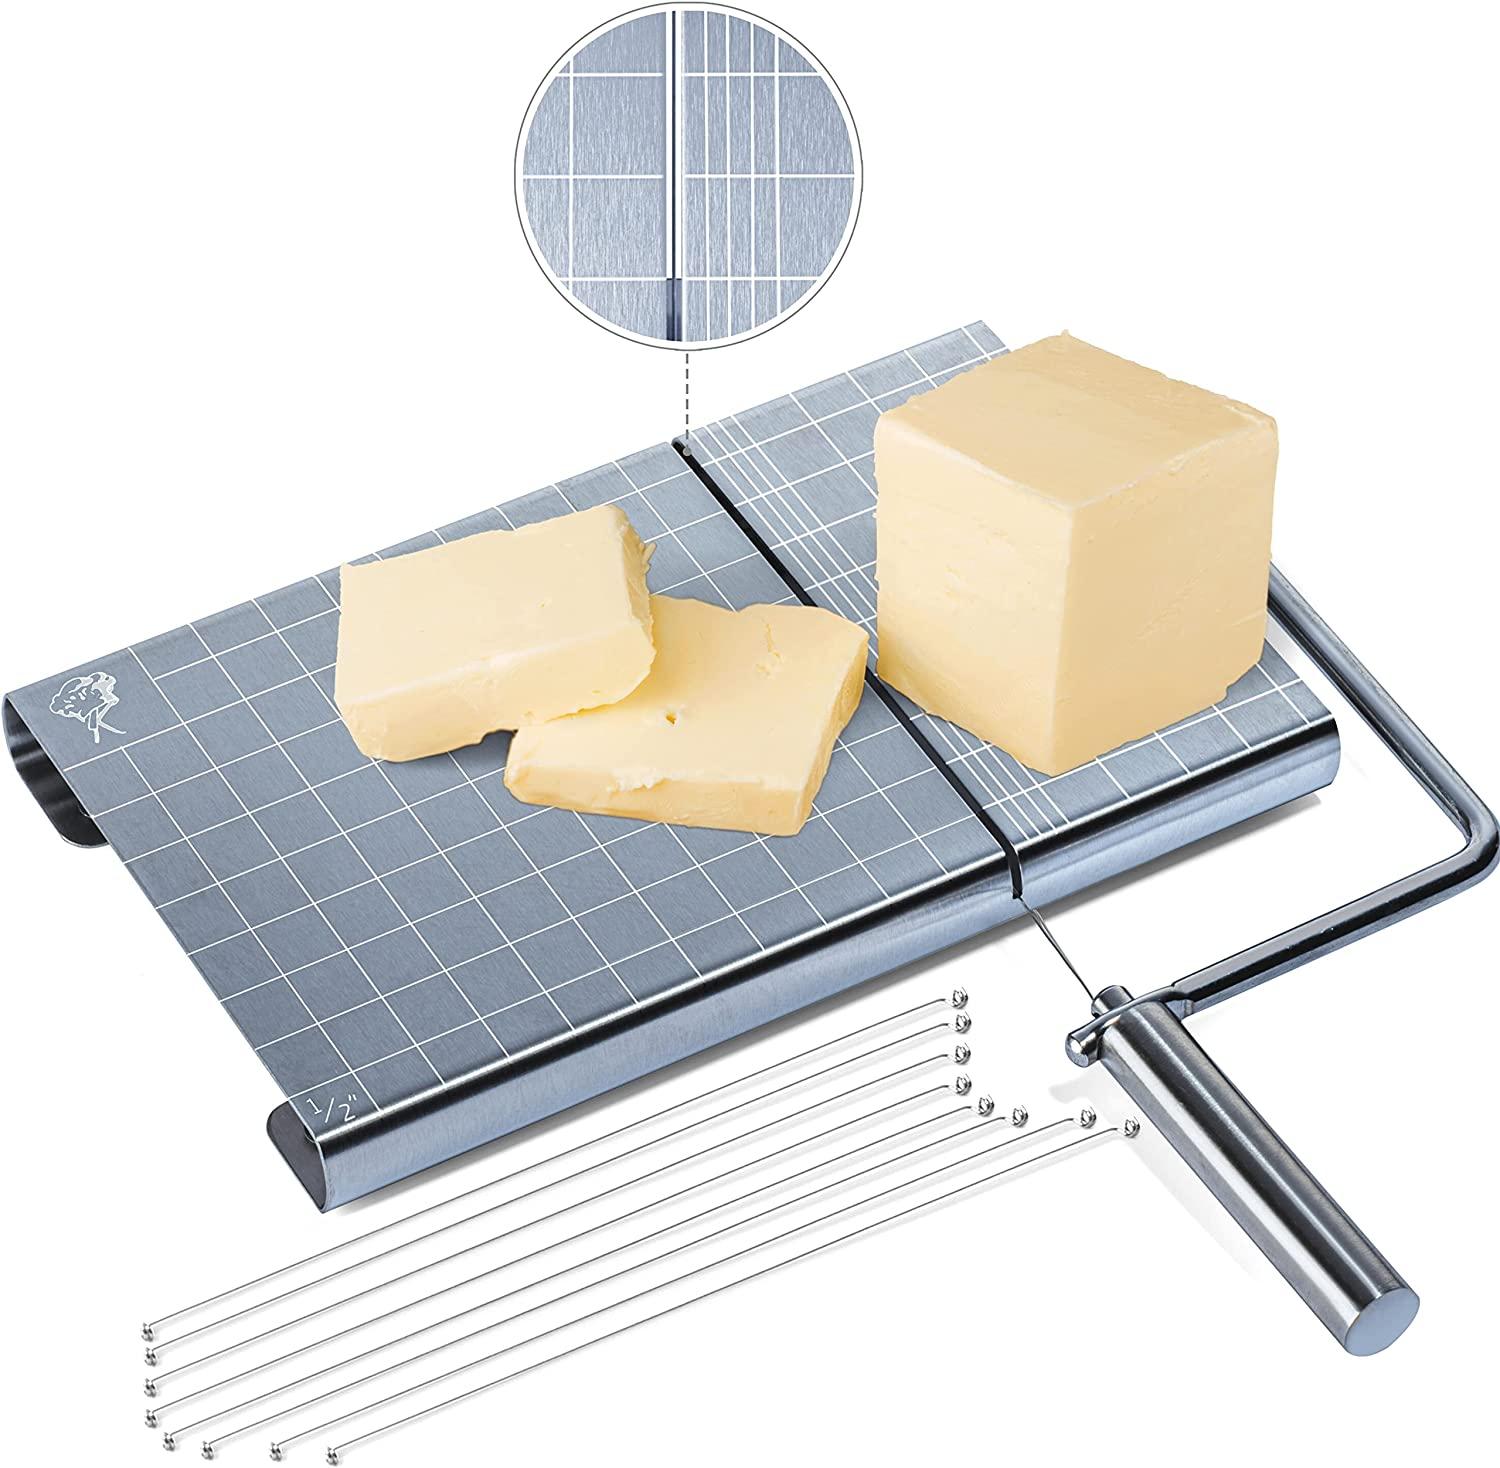 Cheese Slicers With Wire - Cheese Slicers For Block Cheese with Accurate  Size Scale On Cheese Slicer Board For Prices Cuts - Incl. 8 Extra Wires -  Ideal Cheese Cutter with Wire For Charcuterie Boards